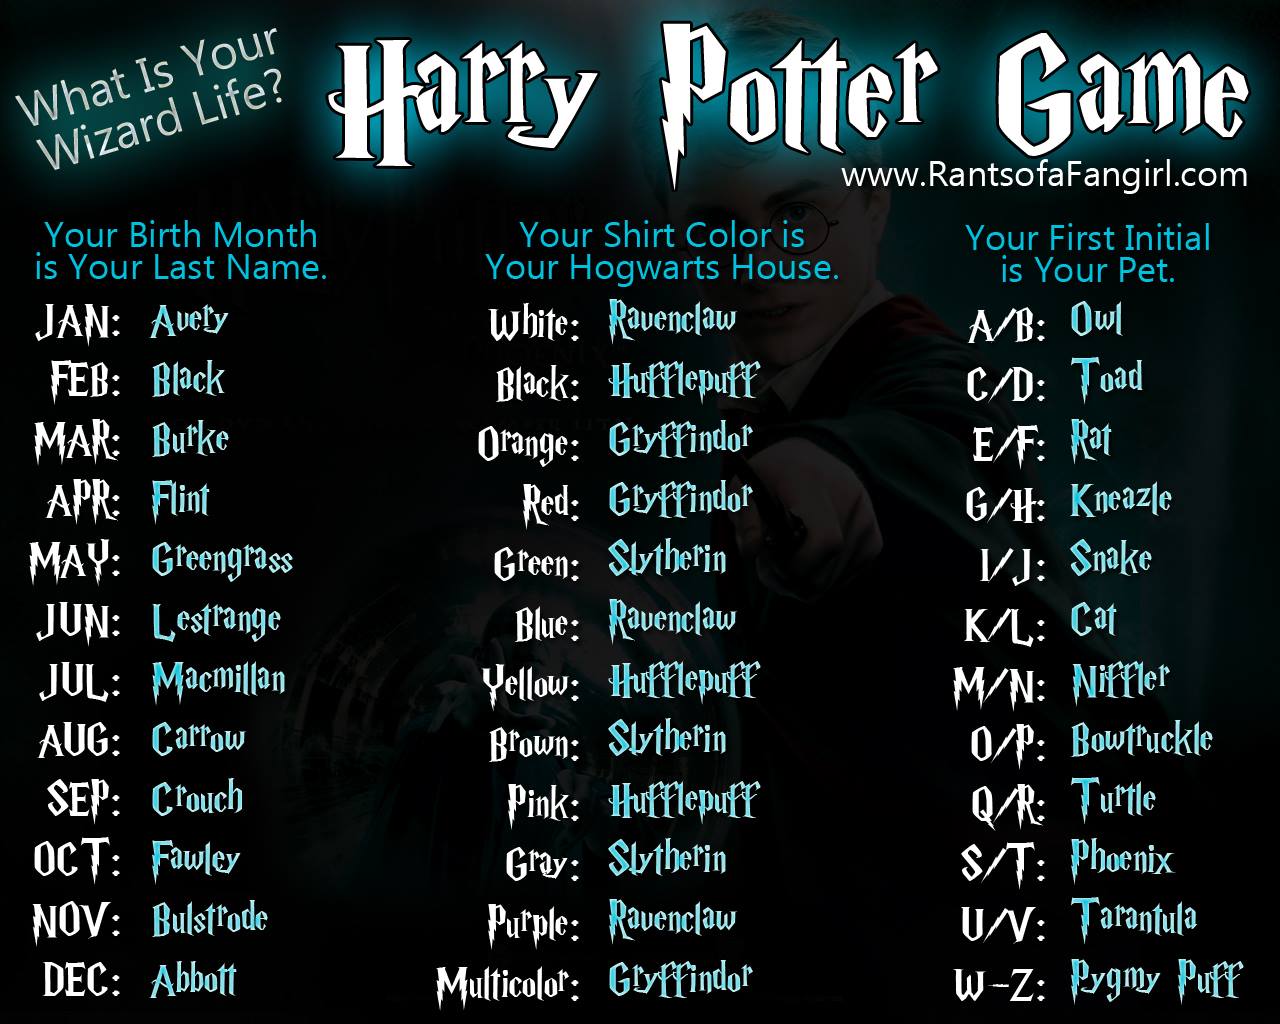 What's Your Harry Potter Name - HD Wallpaper 